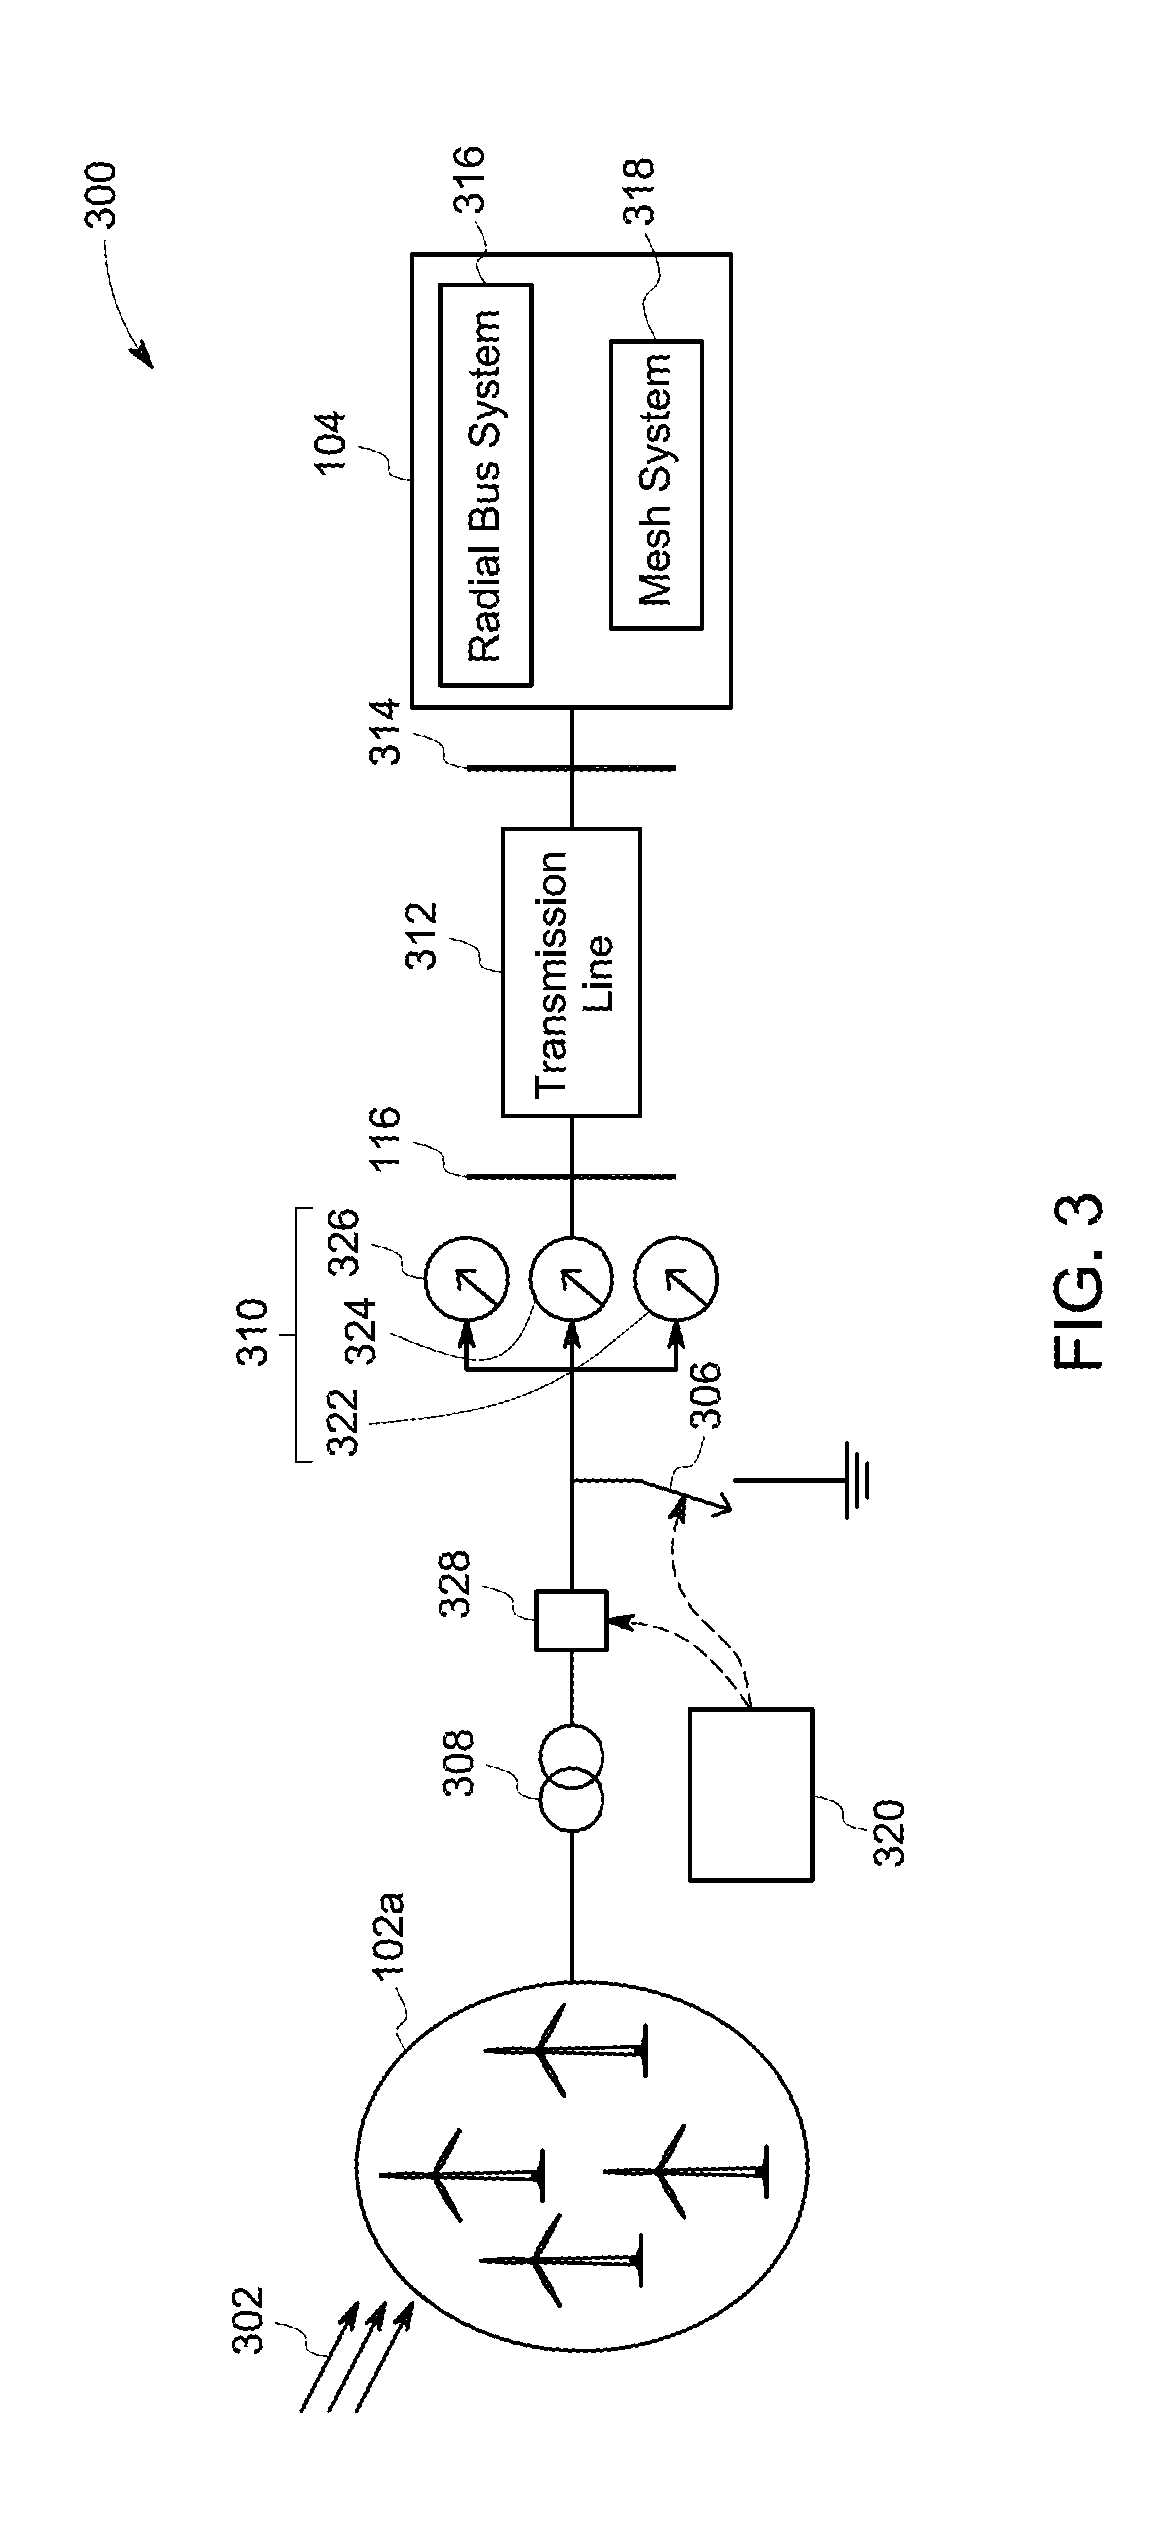 System and method for controlling a power generating unit